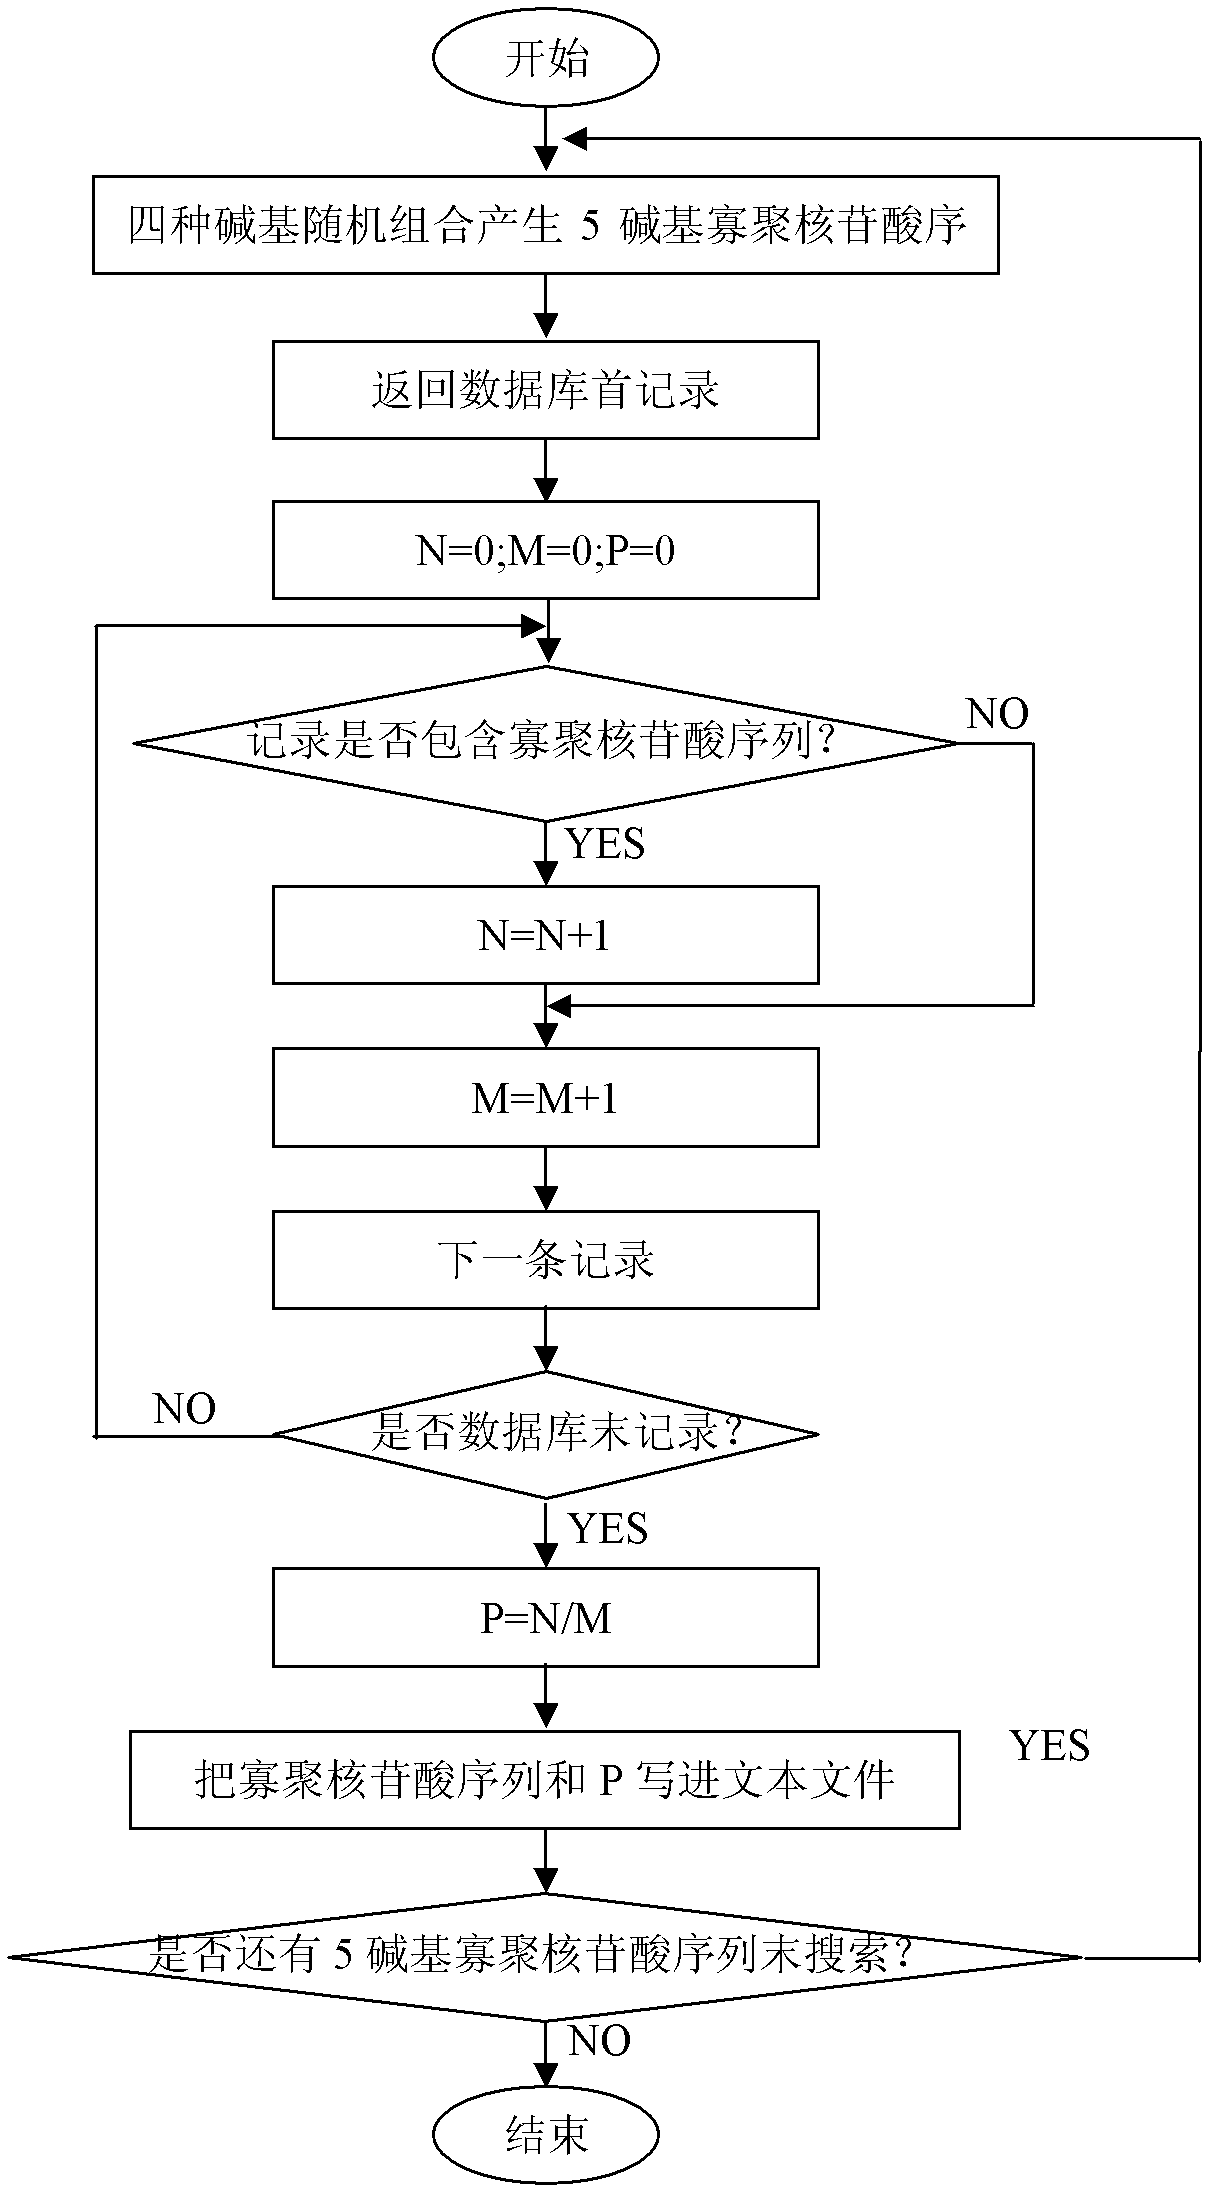 Exon conserved sequence amplified polymophic molecular marker and its analysis method